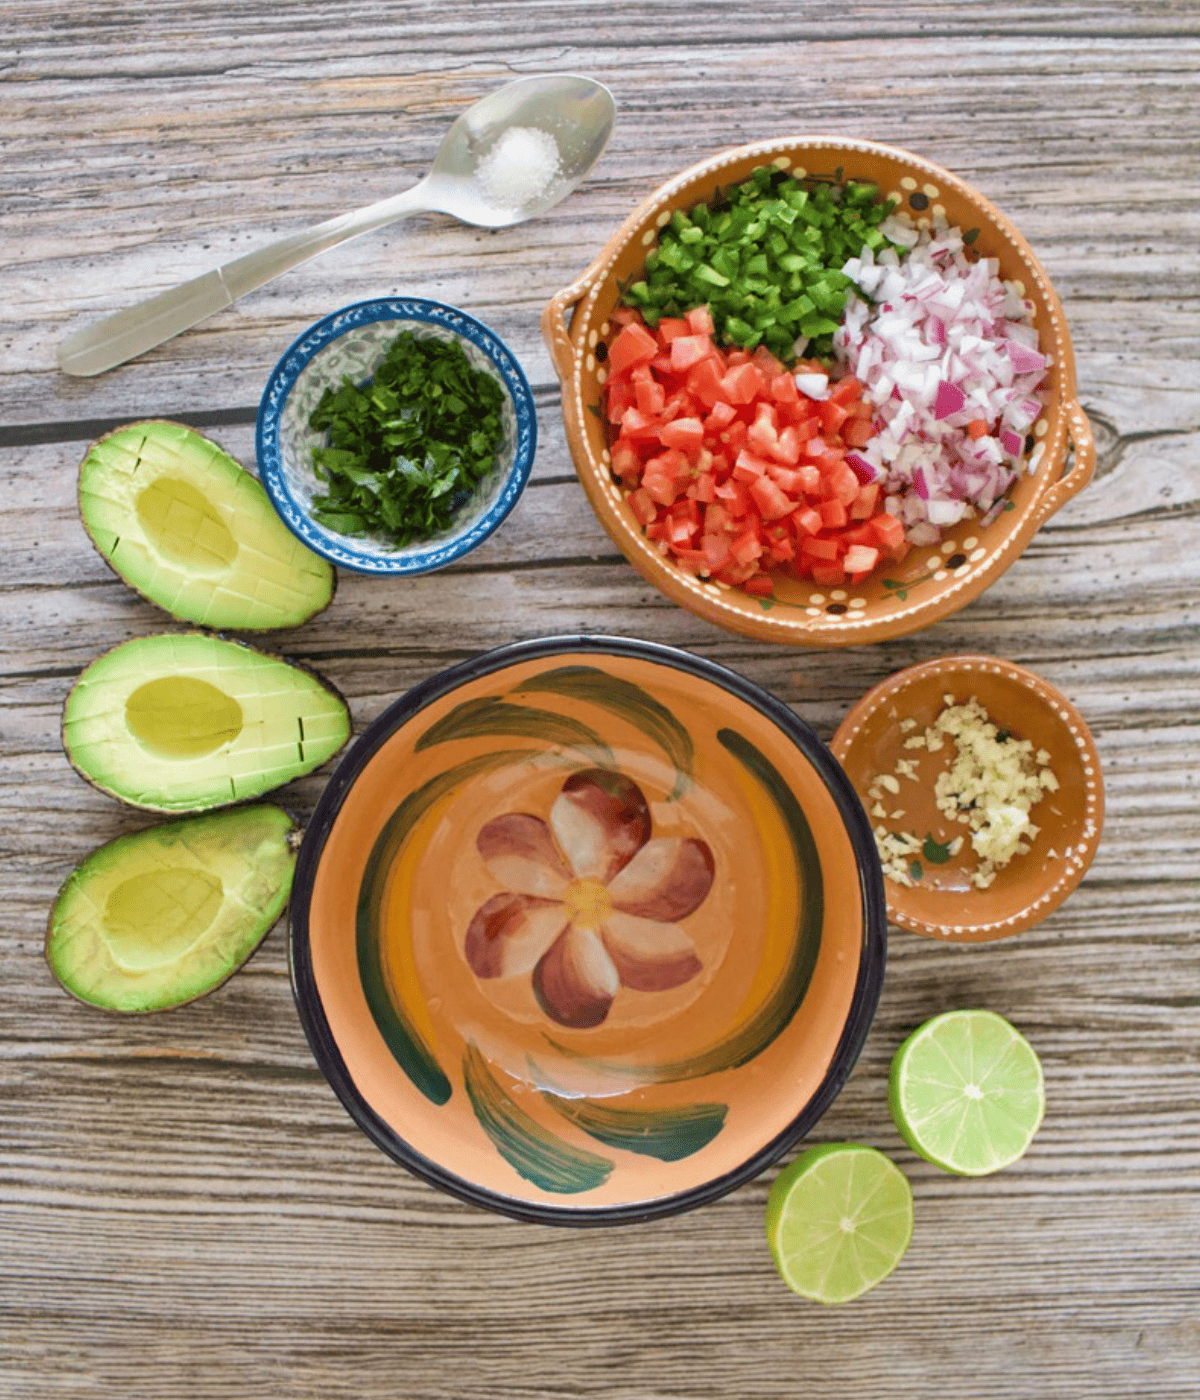 The ingredients needed to make the avocado pico de gallo on a wooden surface.